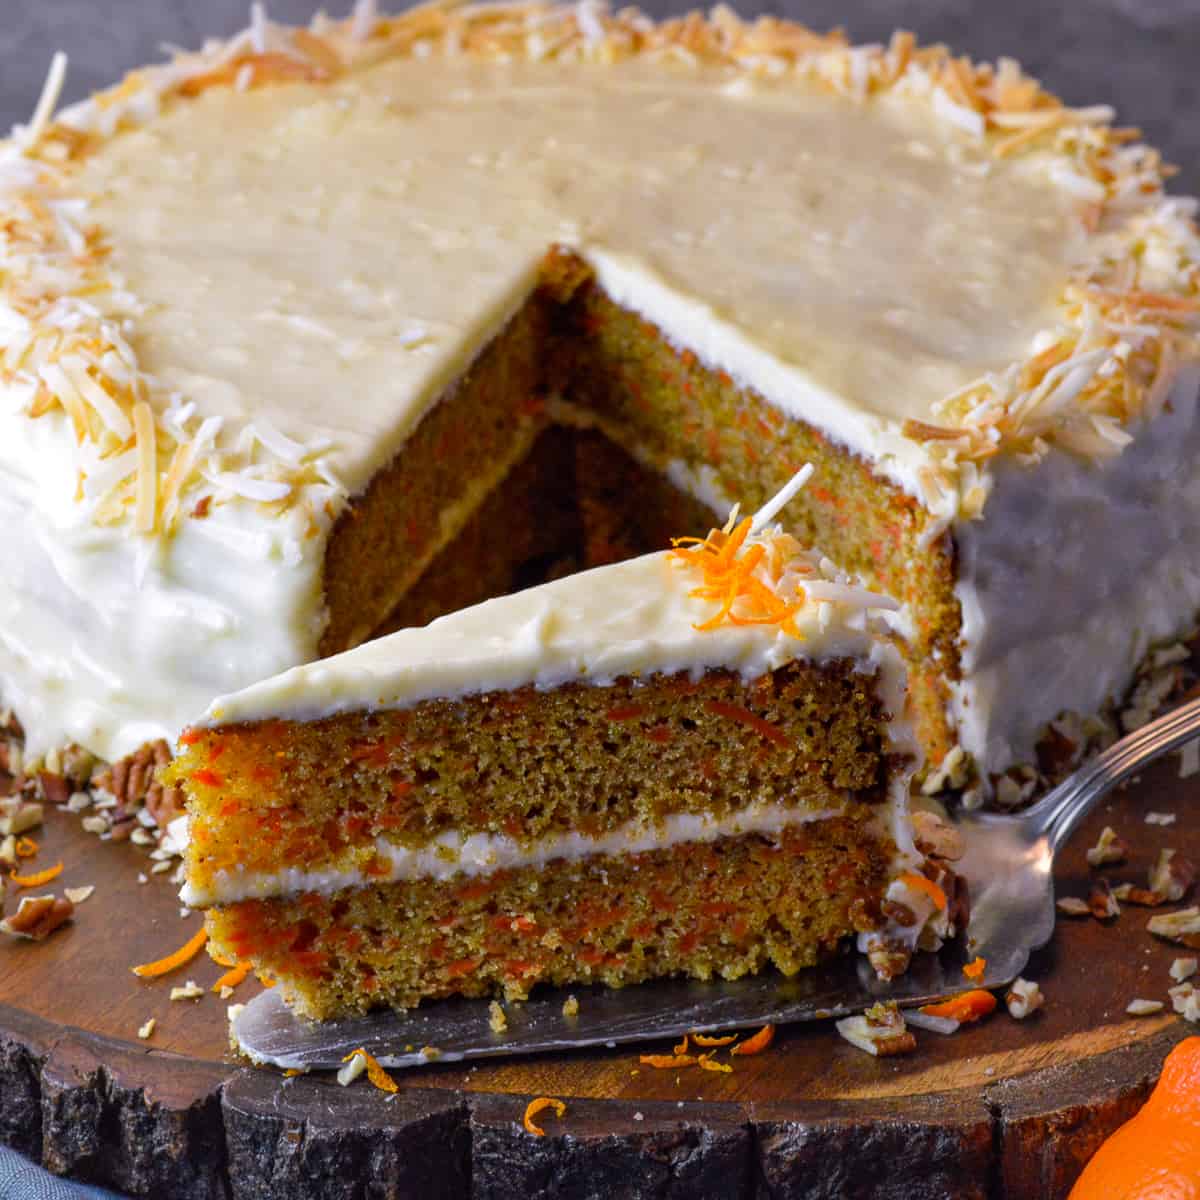 Orange Carrot Cake slice on silver cake spatula with roasted pecans, coconut flakes and orange zest with cream cheese frosting on wooden board